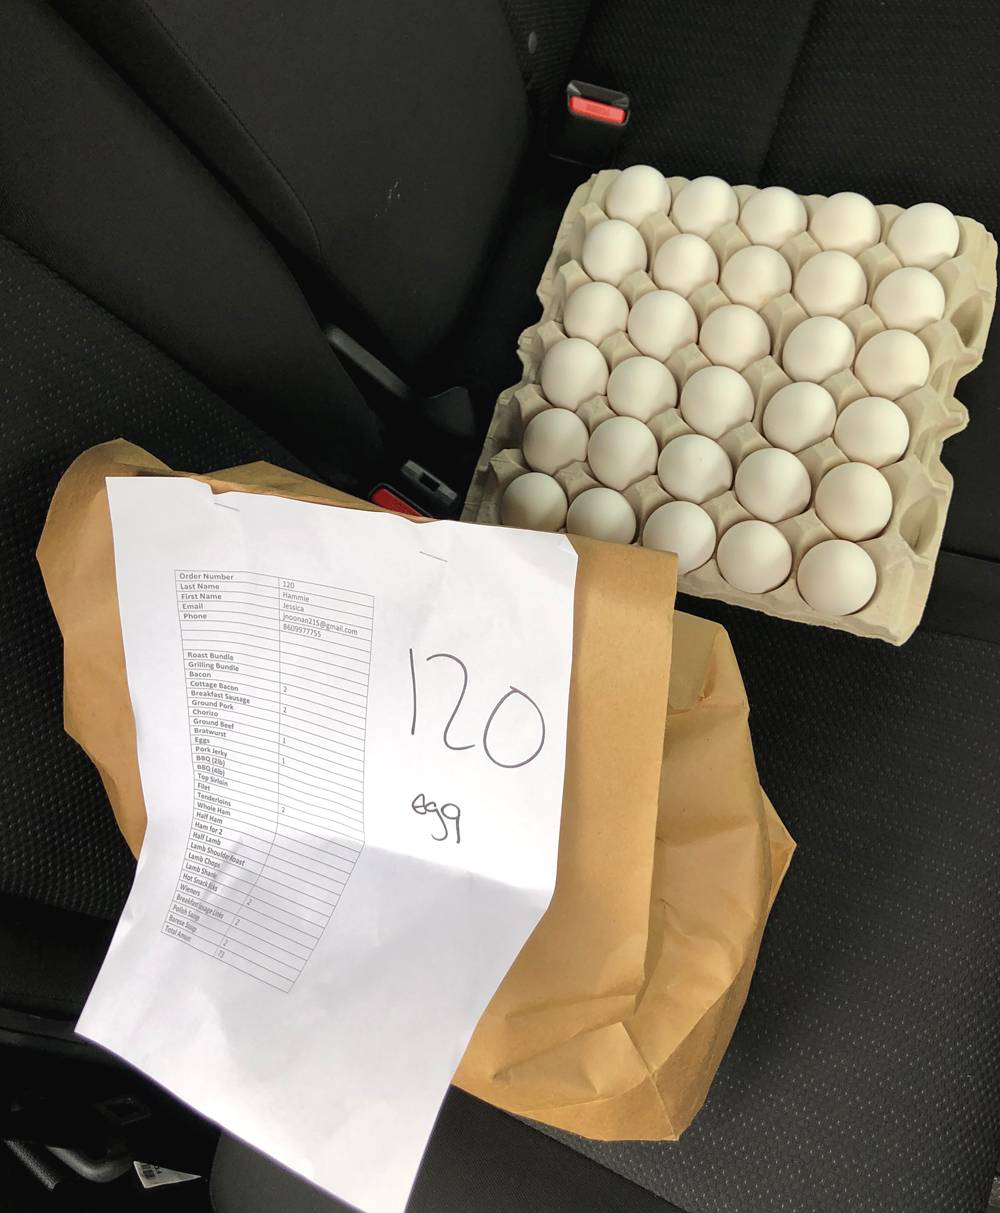 A brown paper bag with an order form stapled to it sits on the backseat of a car. There is an open carton of 30 eggs on the seat as well. Photo by Jessica Hammie. 